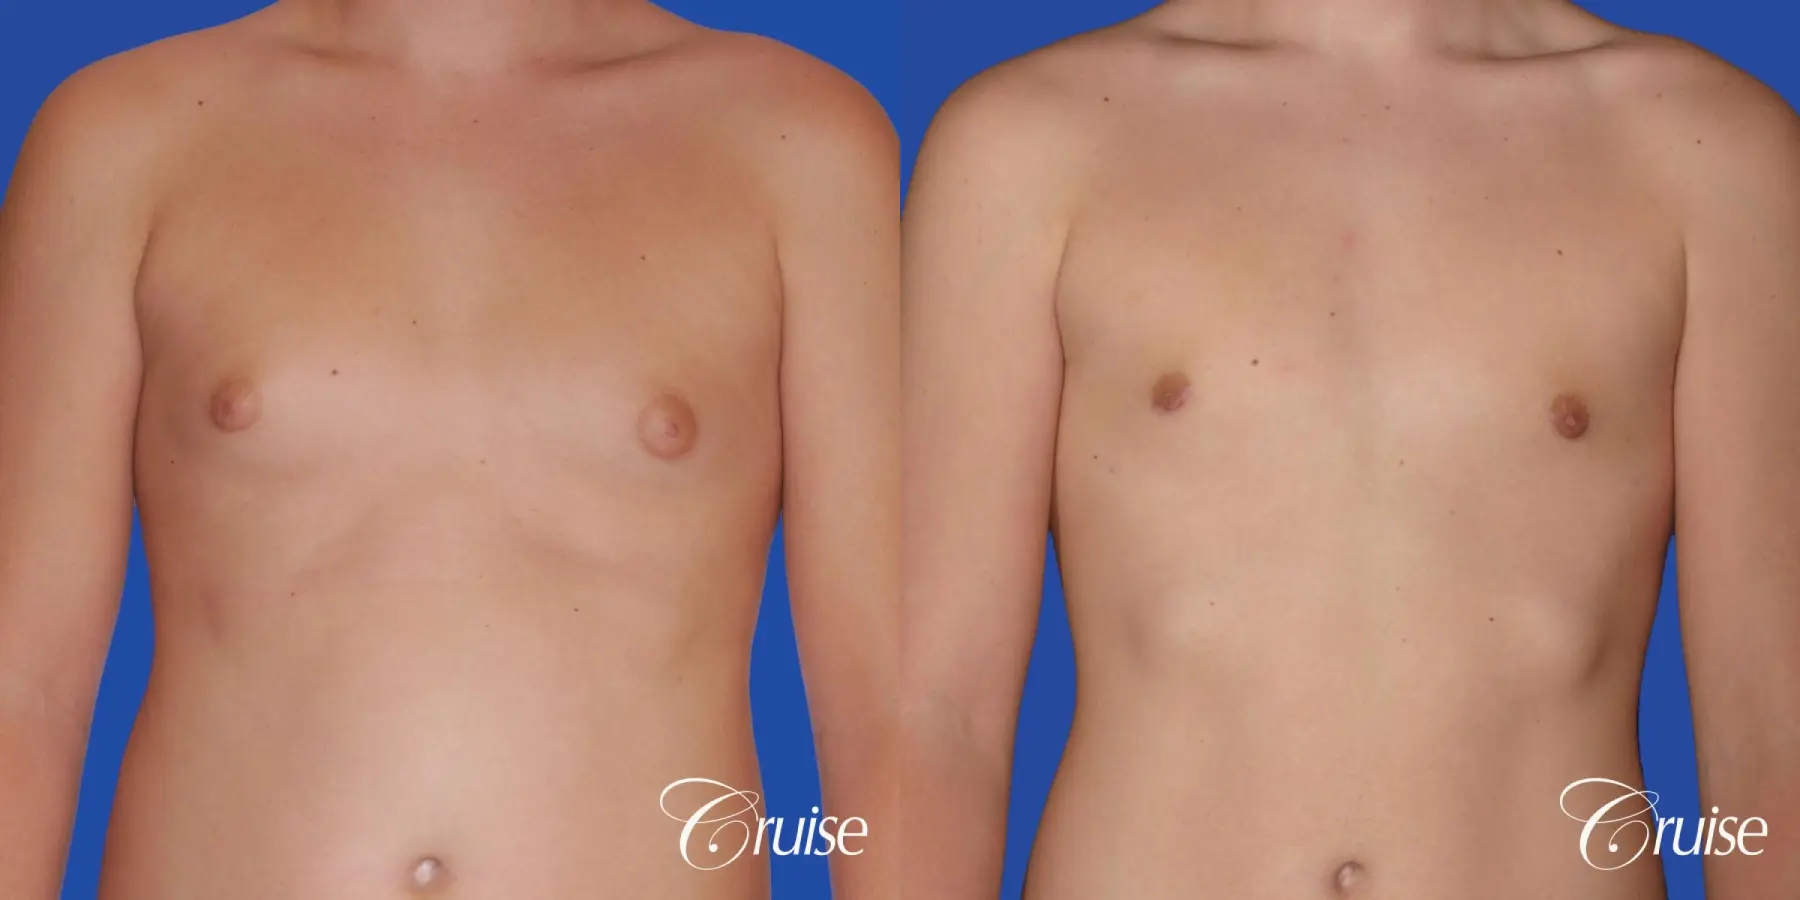 https://www.bragbook.gallery/assets/gallery/220/gynecomastia-before-and-after-GCgNBV36cL13_highres.webp